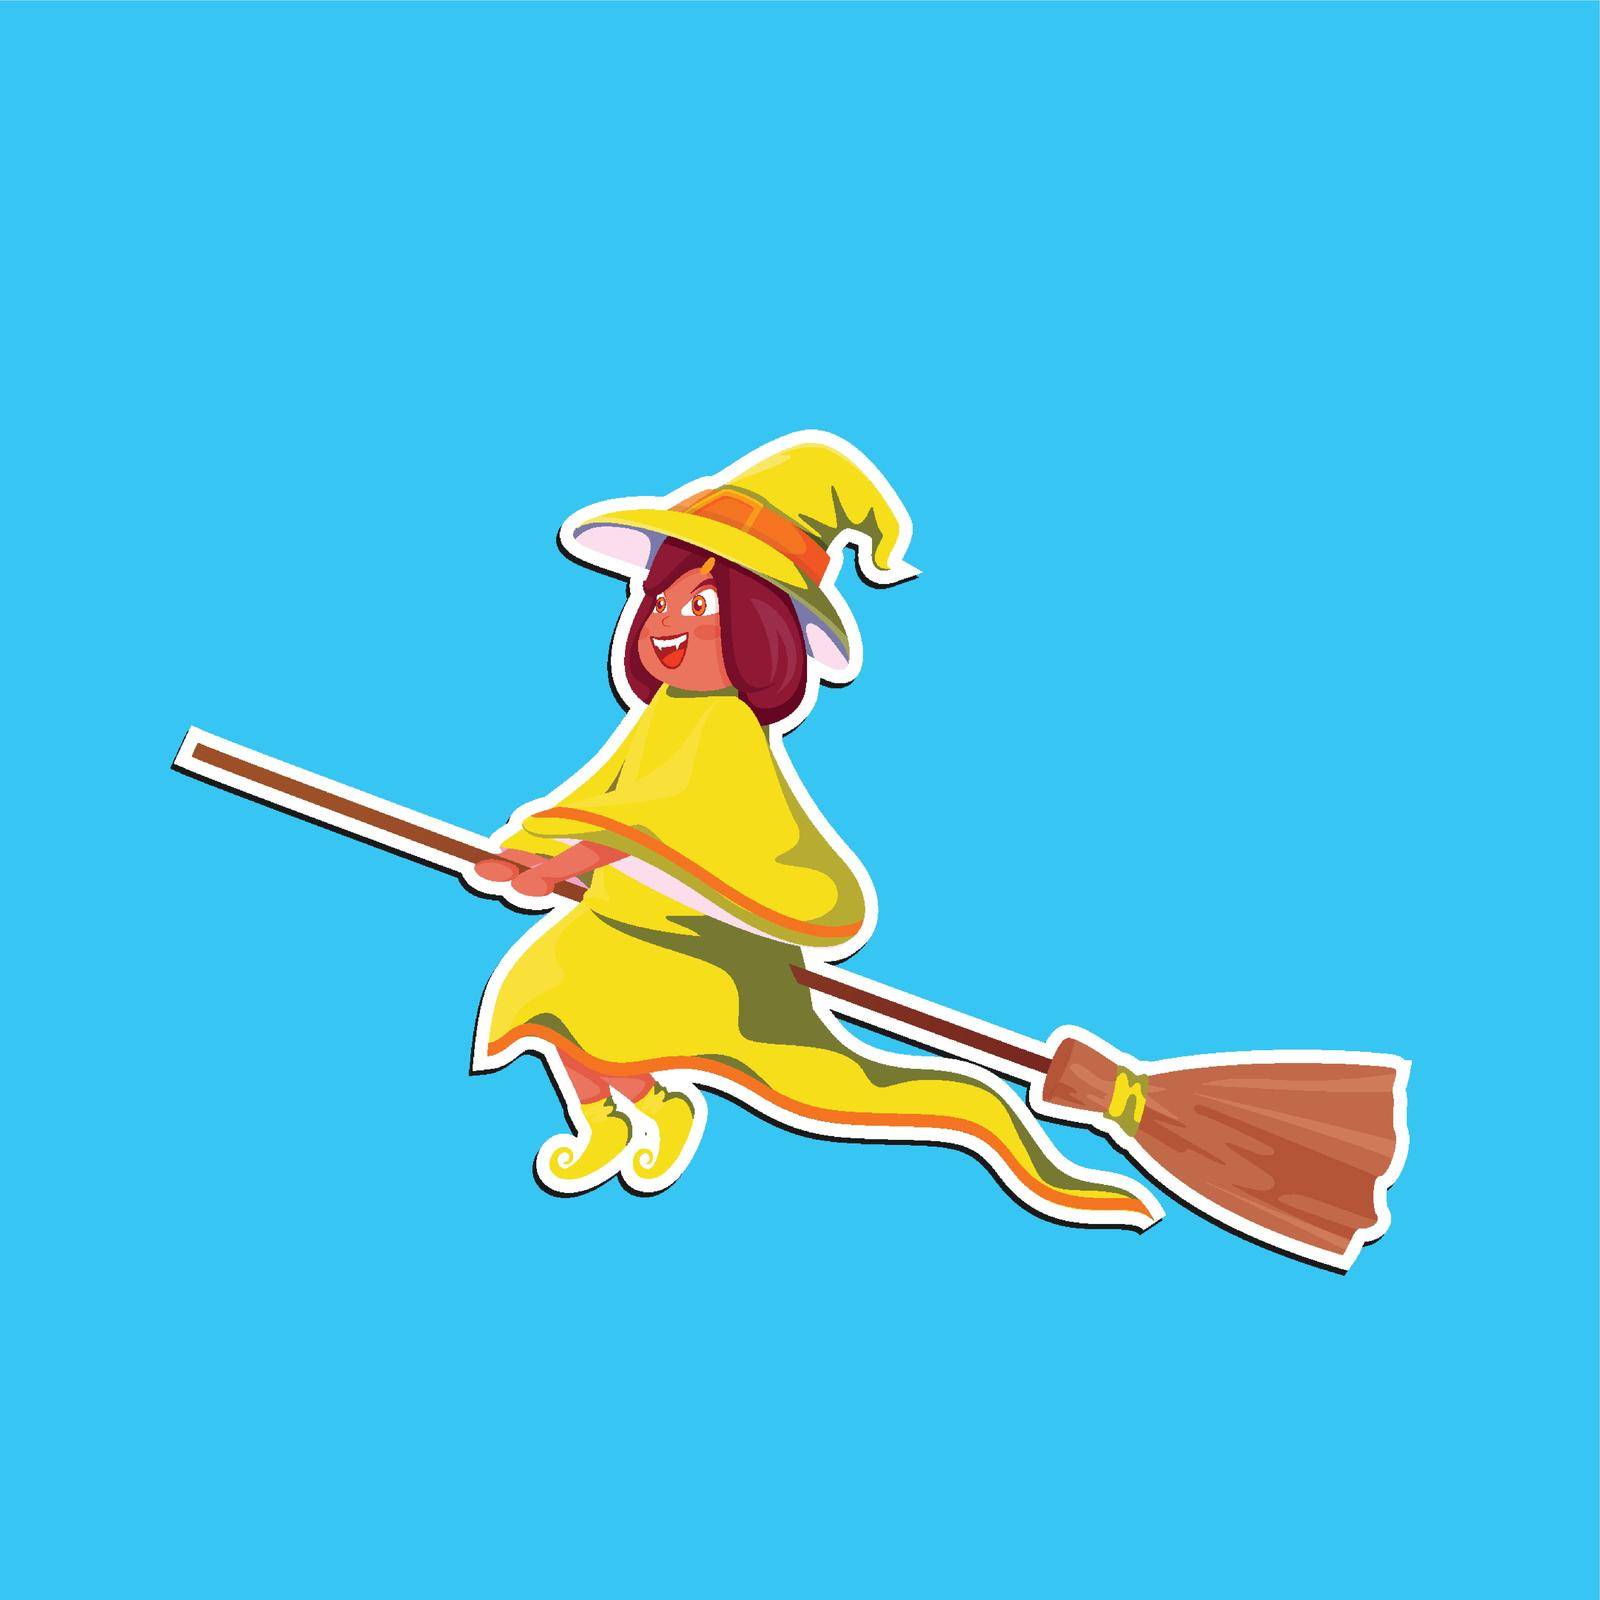 you can use cwitch riding broomstick cartoon character sticker to design banners, posters, backgrounds, print POD...etc.